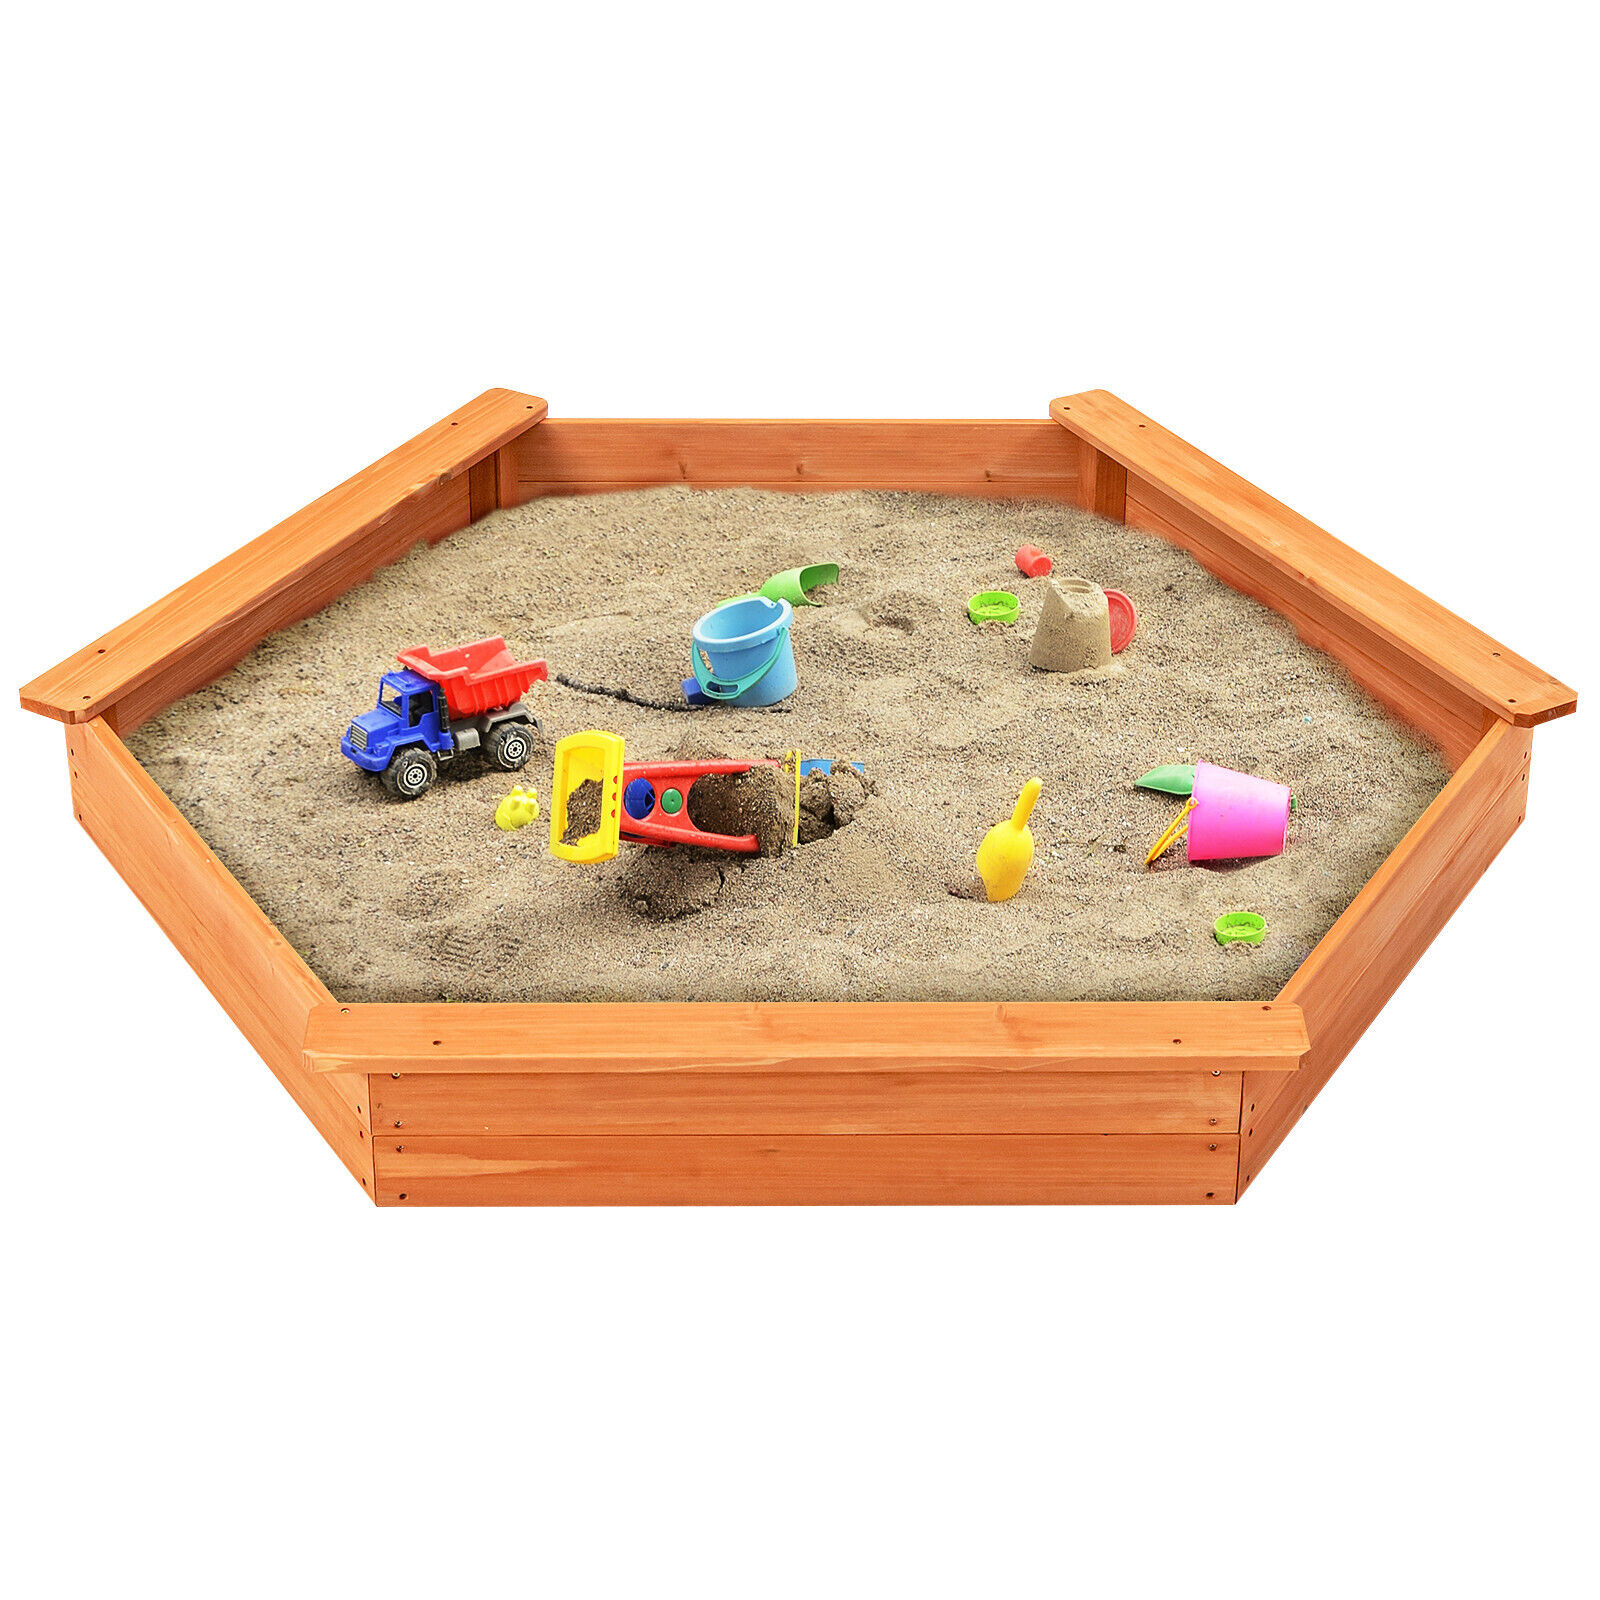 Kids Wooden Sandbox with Oxford Cover and Seat